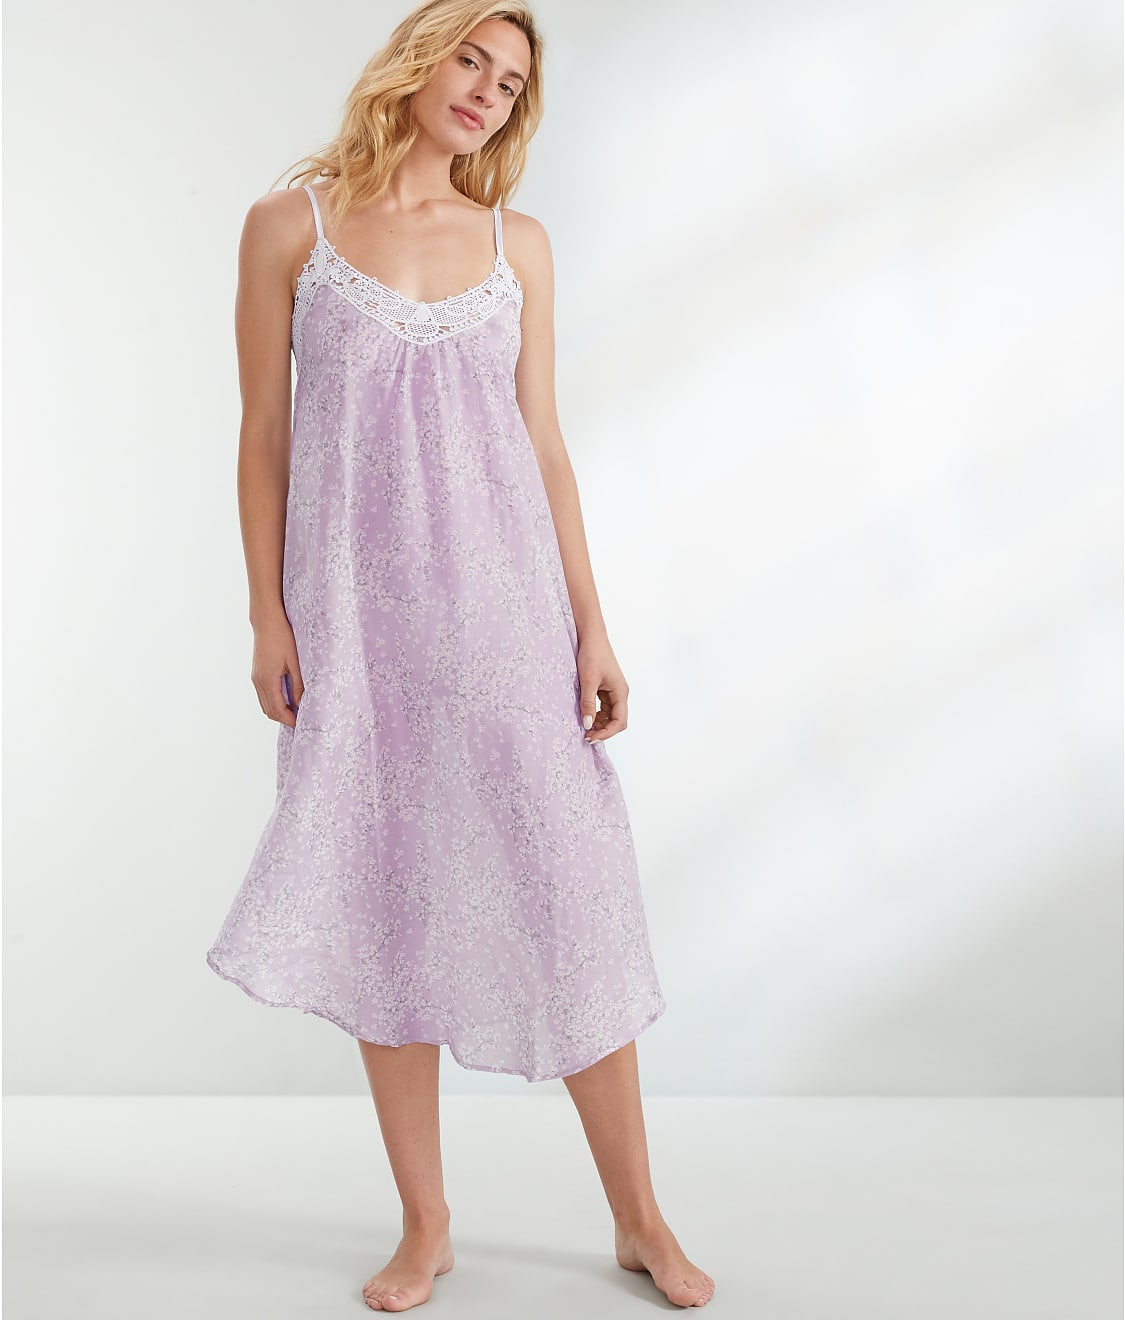 Papinelle: Cheri Blossom Woven Nightgown 23498